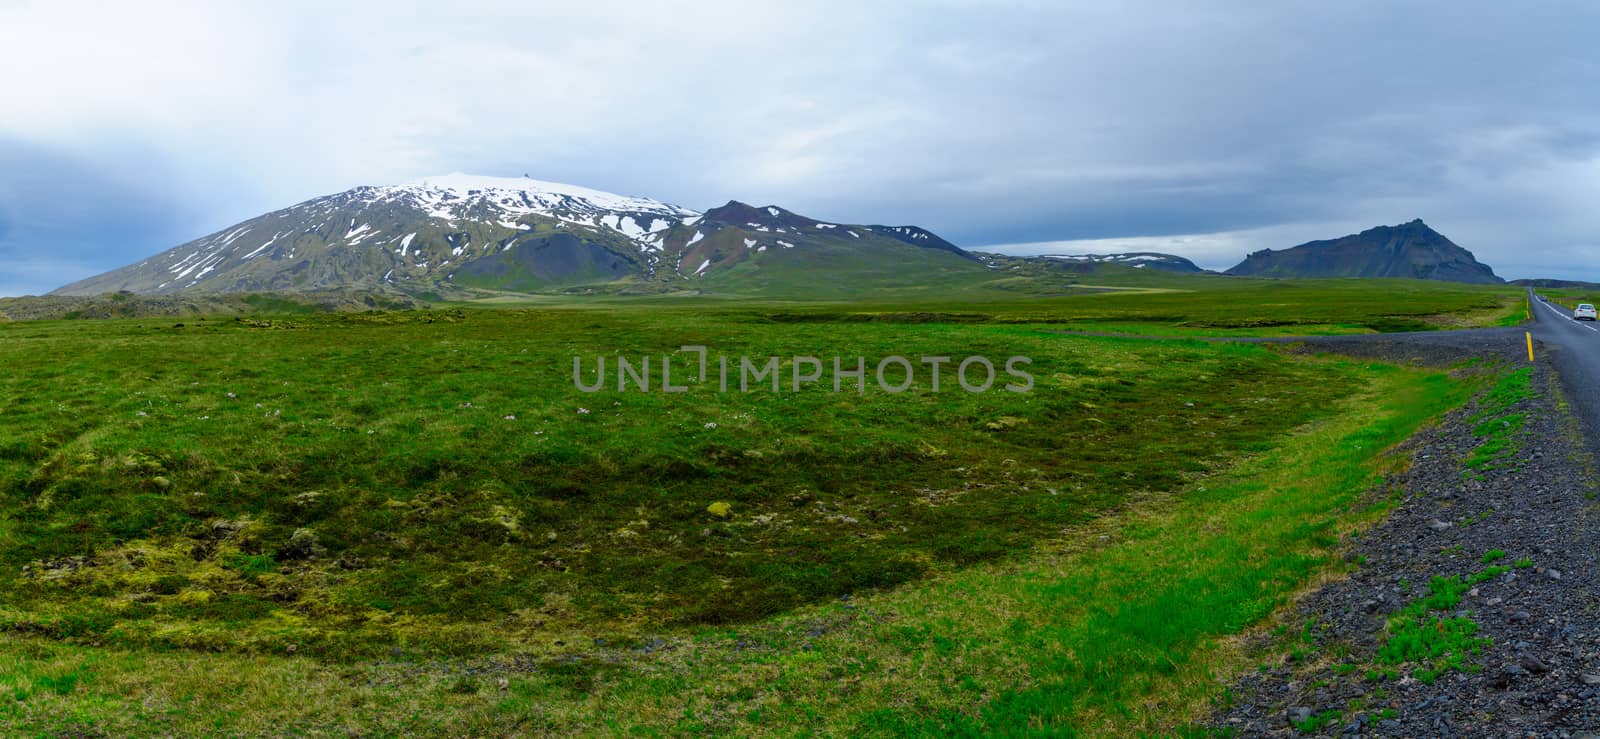 Landscape and the Snaefellsjokull volcano, in the Snaefellsnes peninsula, west Iceland